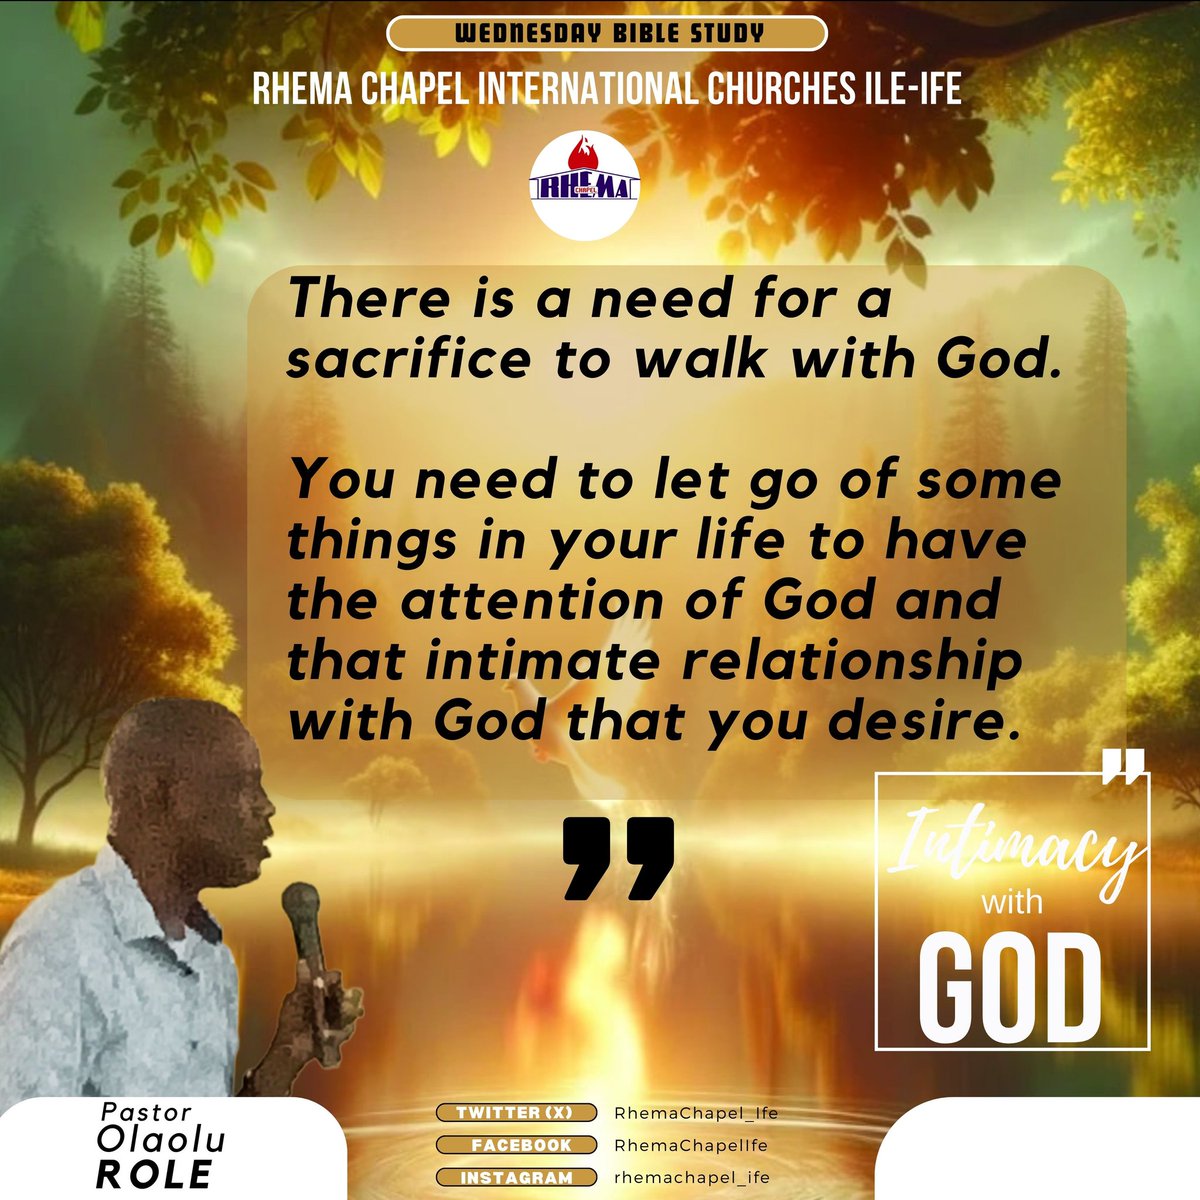 Pastor Olaolu Role took us on another ride on #IntimacyWithGod on our Wednesday #BibleStudy service.

Here is the excerpt of the message that places a demand on believers to crave and truly desire God.

#RhemaIfe
#Soaring
#Intimacy